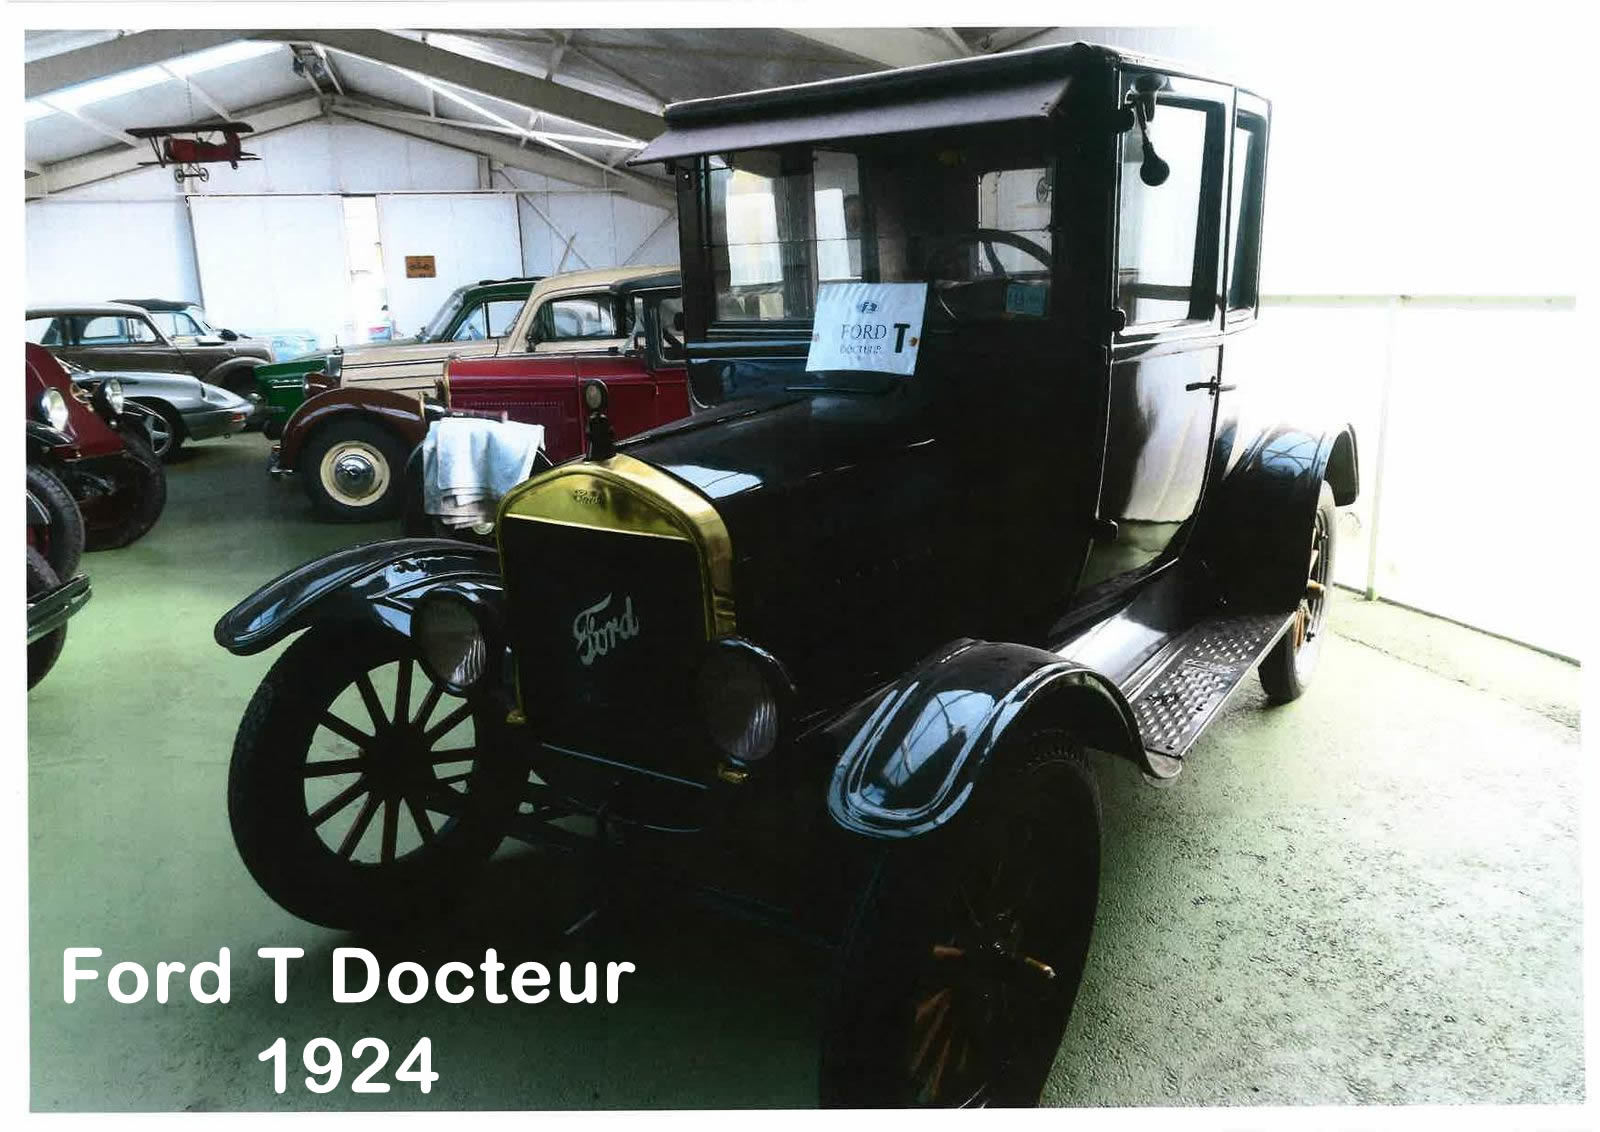 09 Ford T Docteur 1924